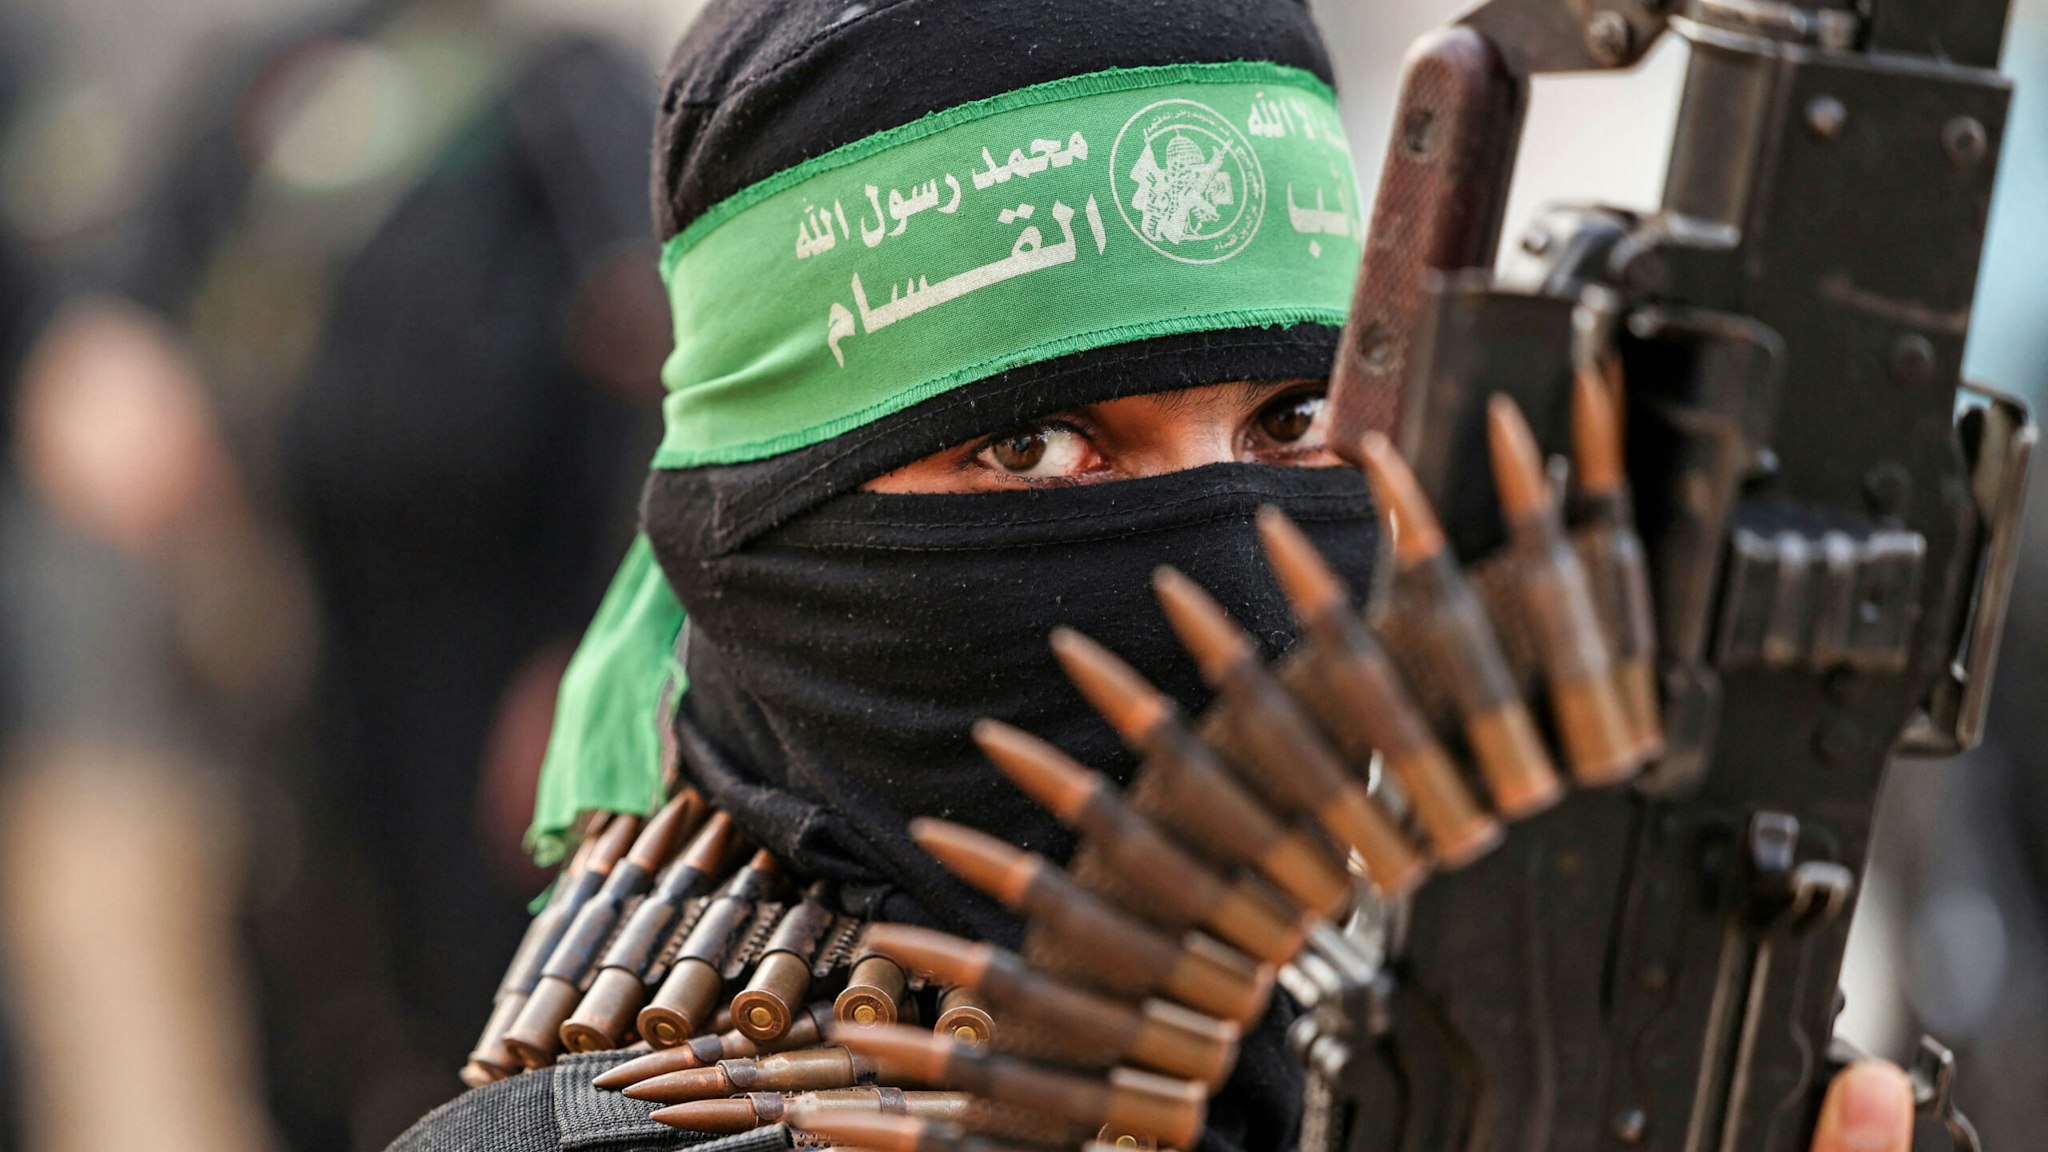 TOPSHOT - A member of Ezzedine al-Qassam Brigades, military wing of the Palestinian Hamas movement, takes part in a parade in Gaza City on November 14, 2021.